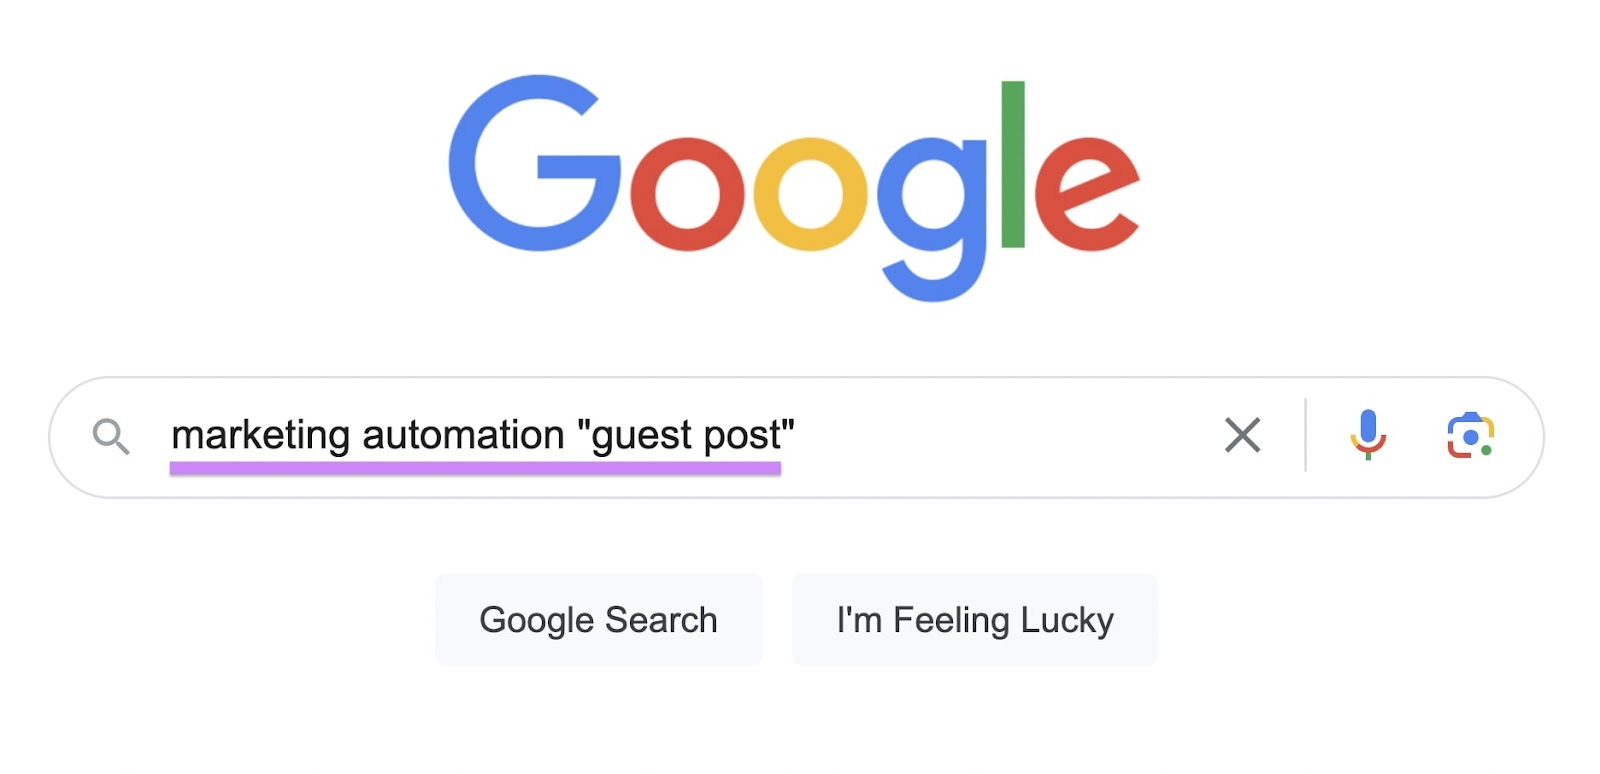 Google search bar with marketing automation "guest post" in it.